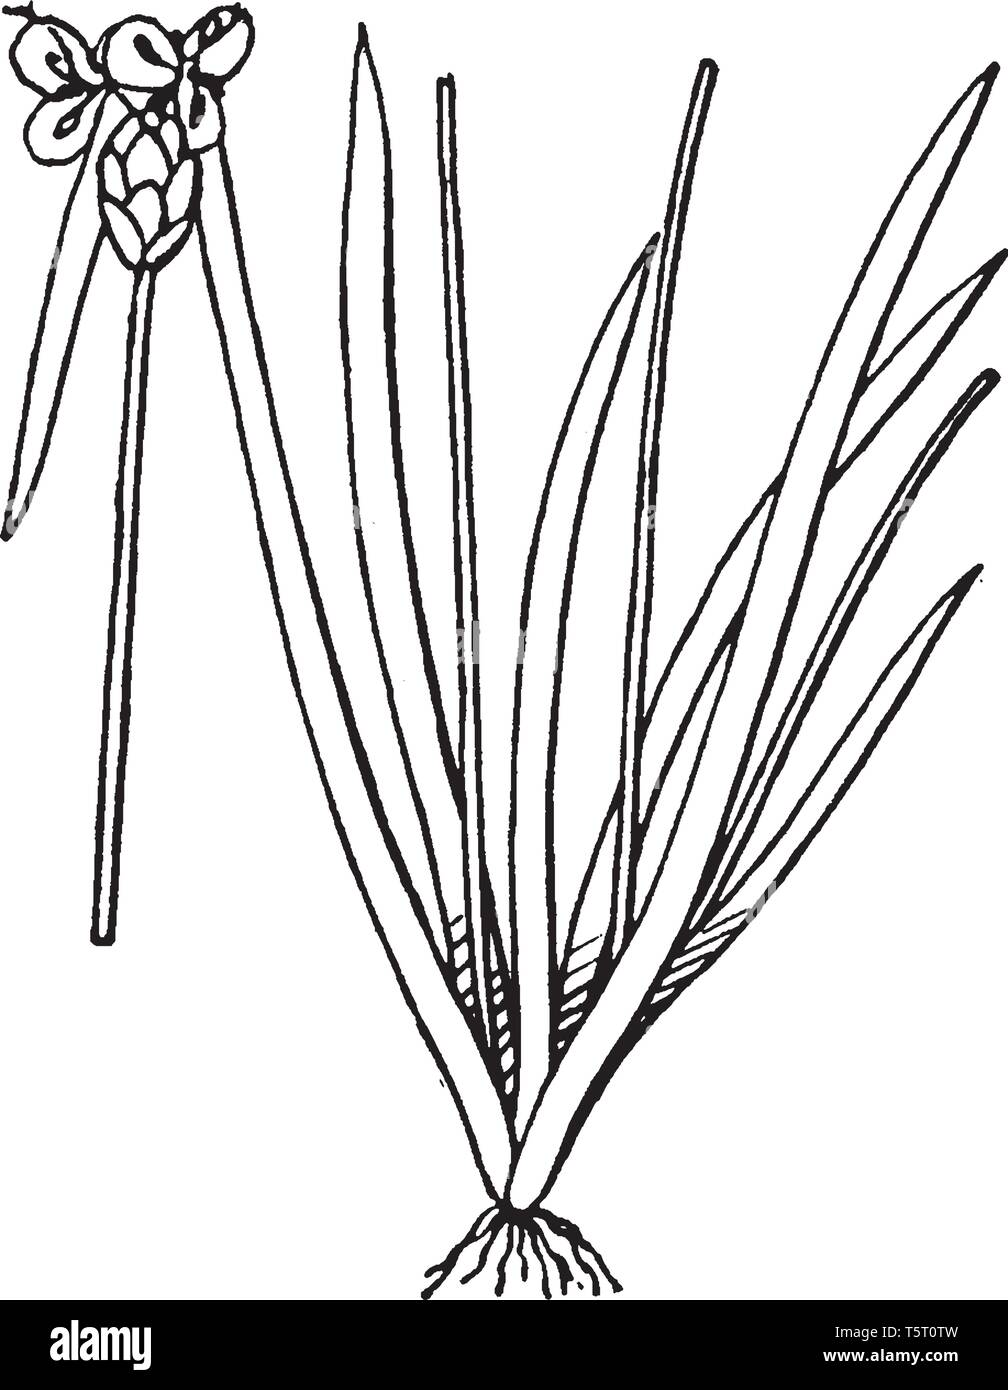 Xyris is member of yellow-eyed-grass family. It has small yellow flowers. It is grows in lake and pond shores, vintage line drawing or engraving illus Stock Vector